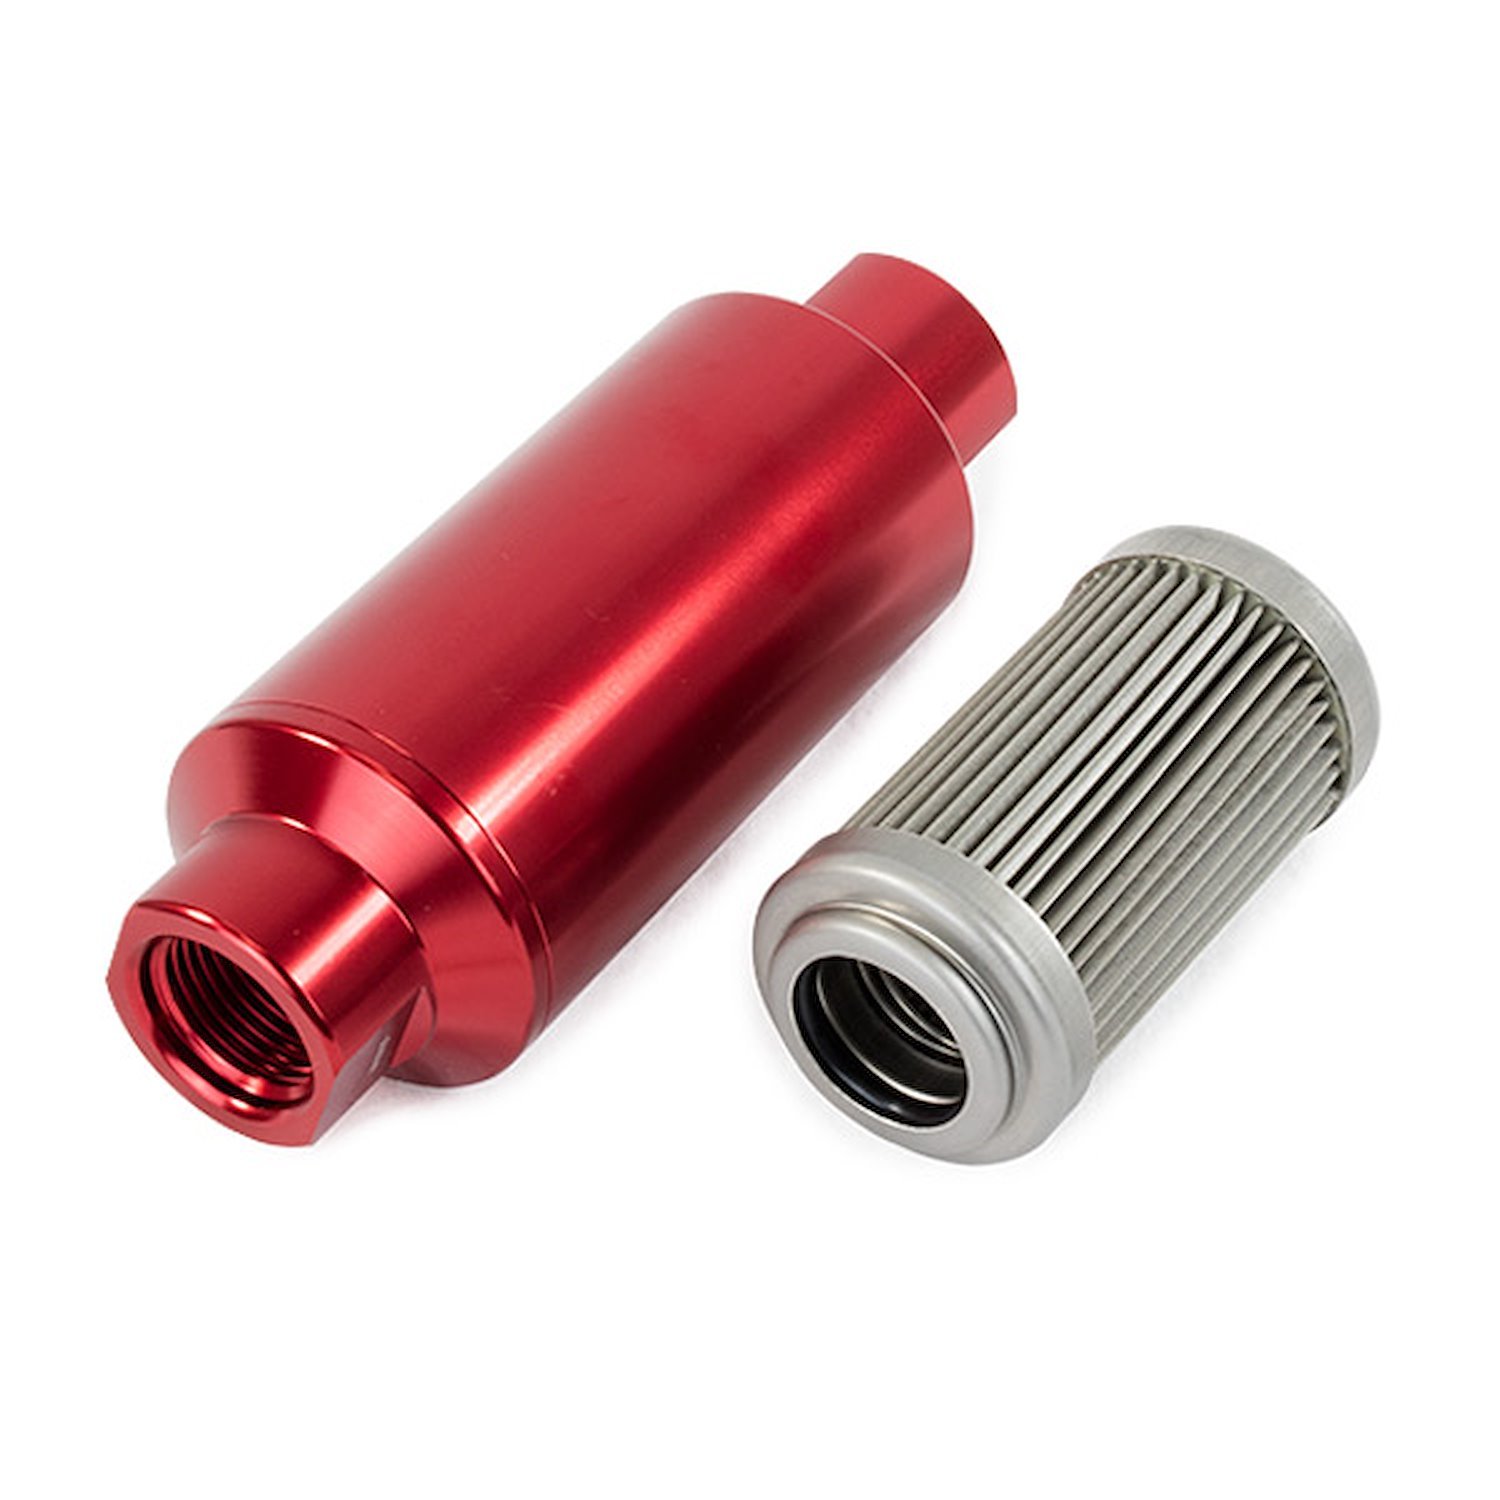 JM1022R Fuel Filter w/ 40 Micron Stainless Steel Element, Red